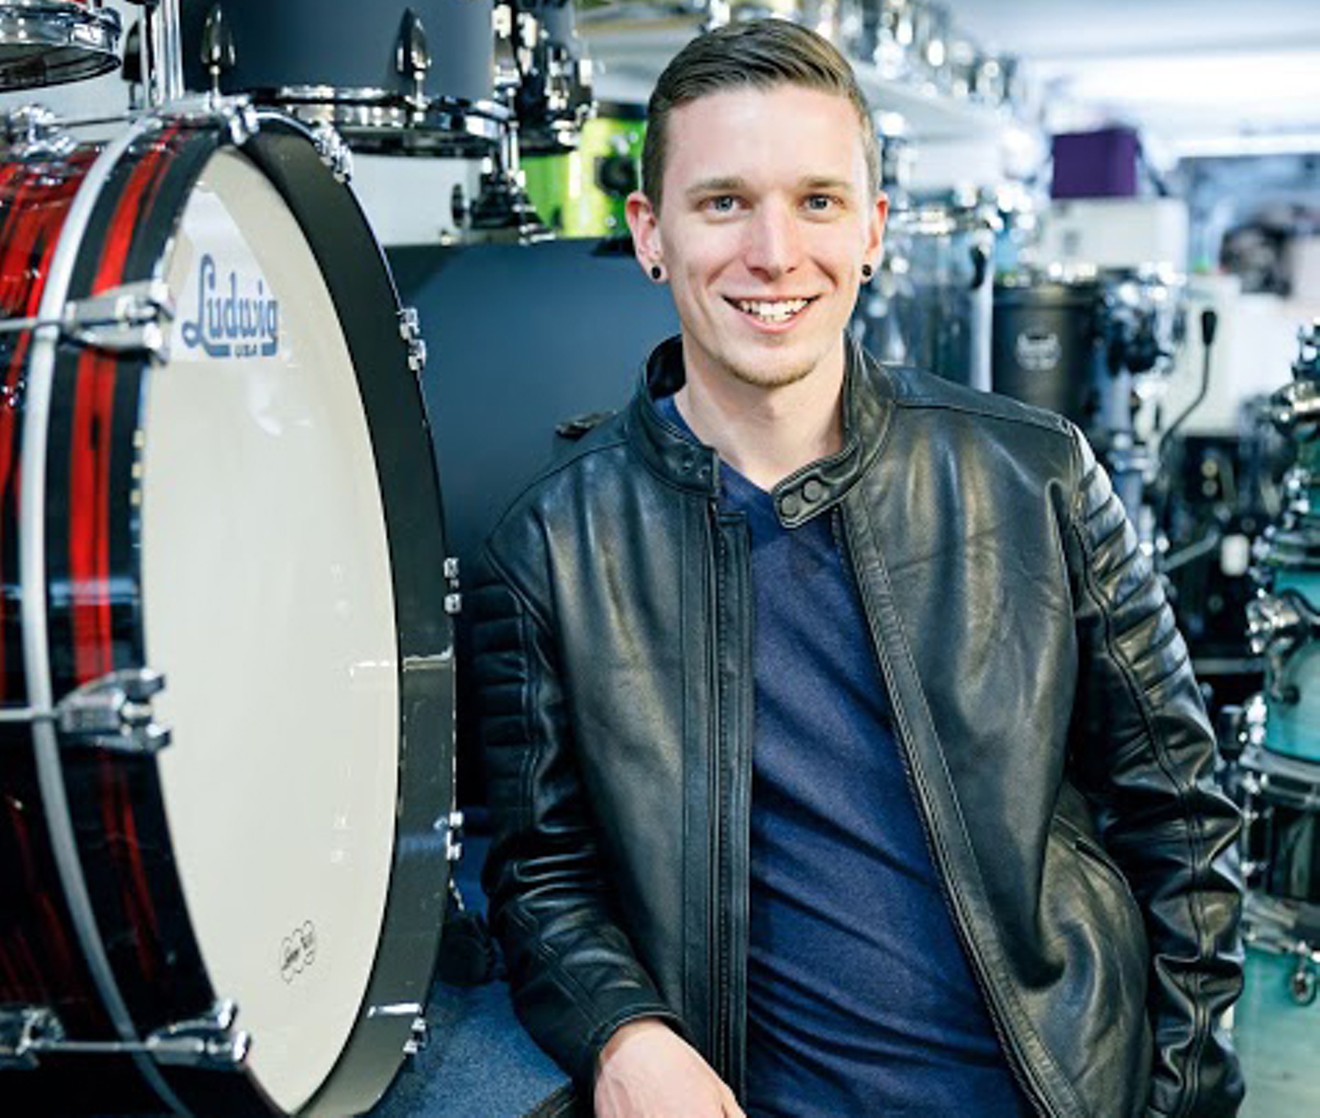 Alex Simpson is the new owner of Rupp's Drums.